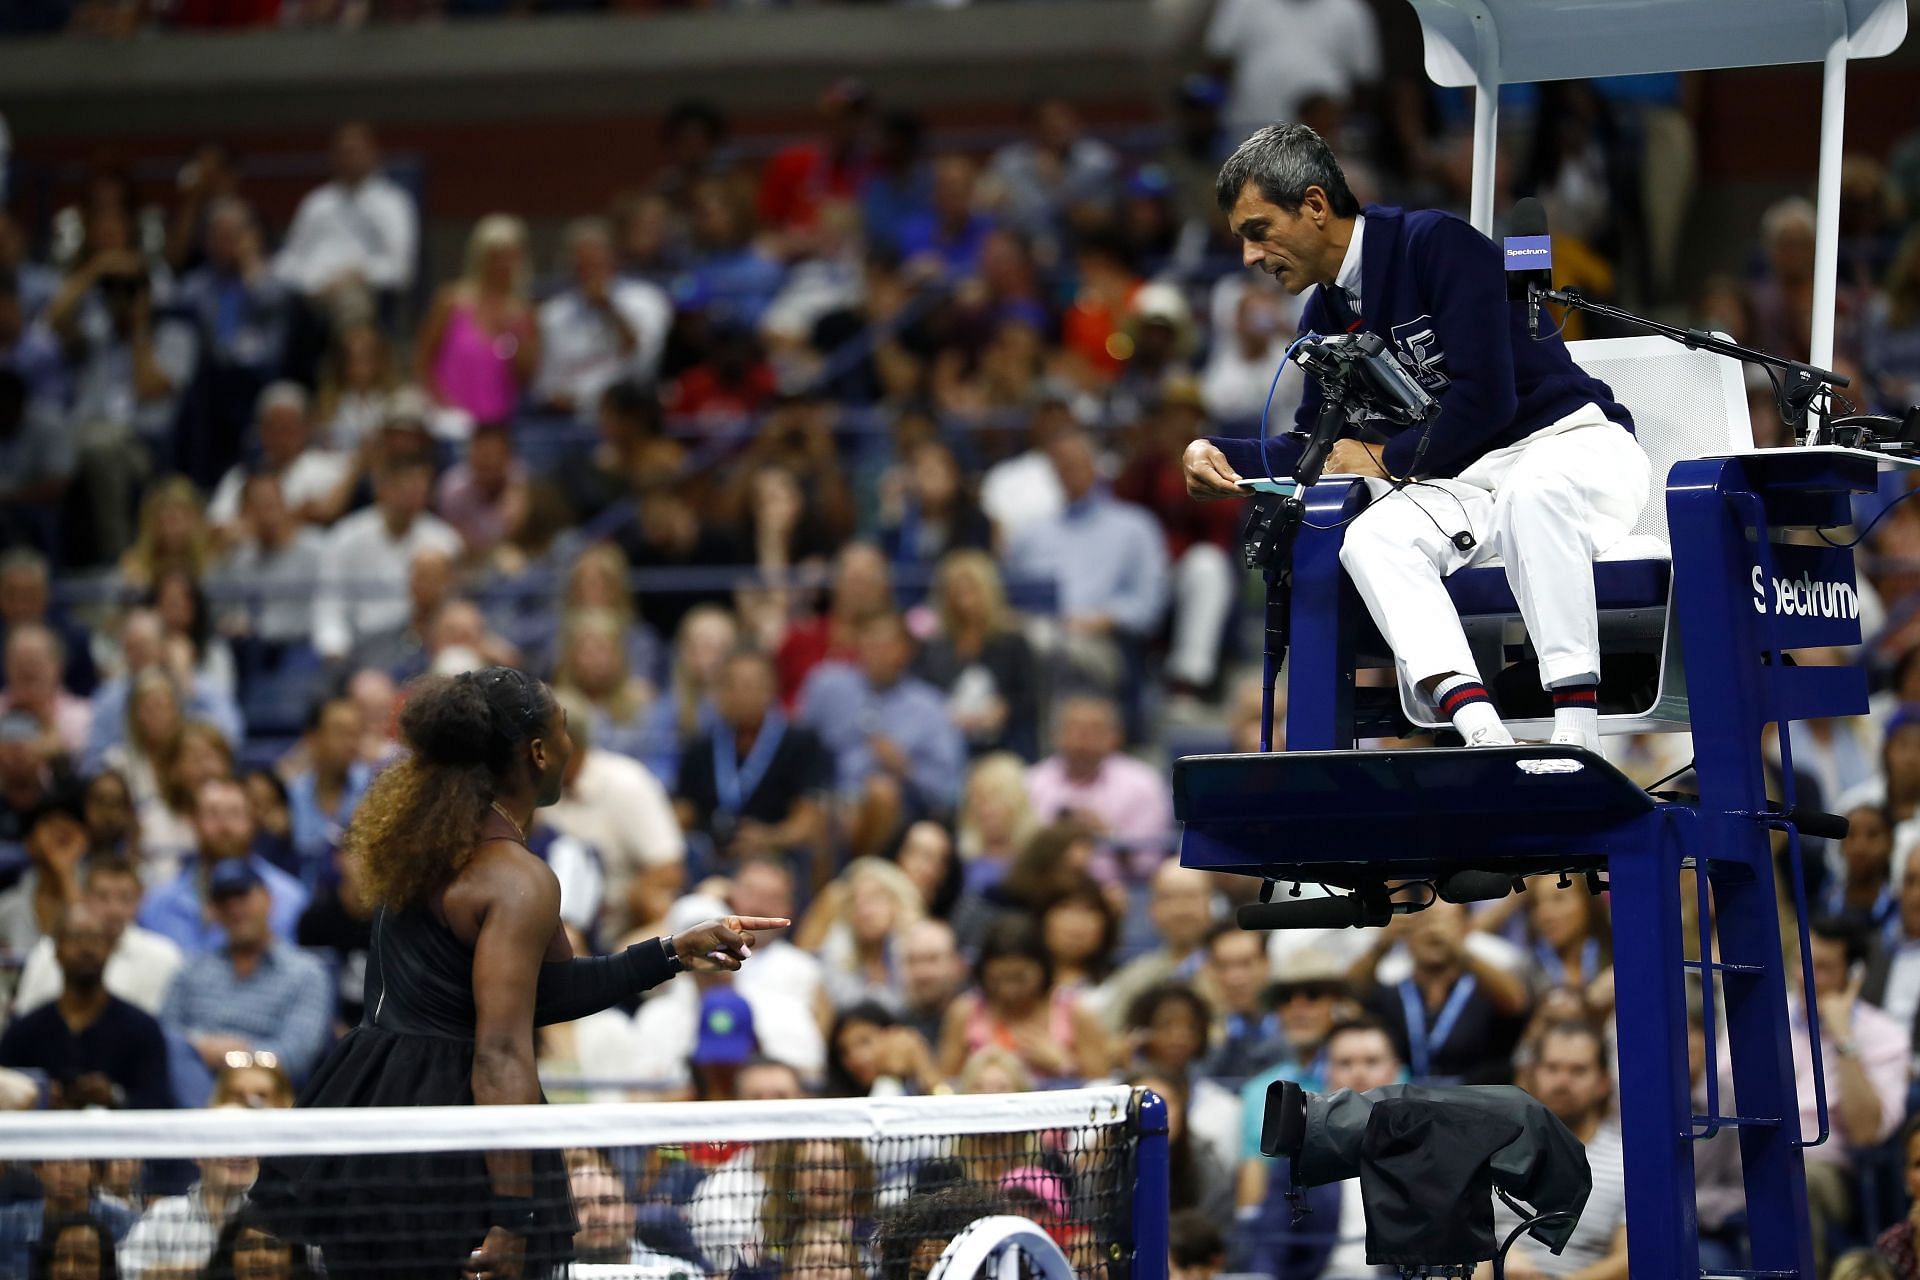 Serena Willaims in an argument with Carlos Ramos at the 2018 US Open final.